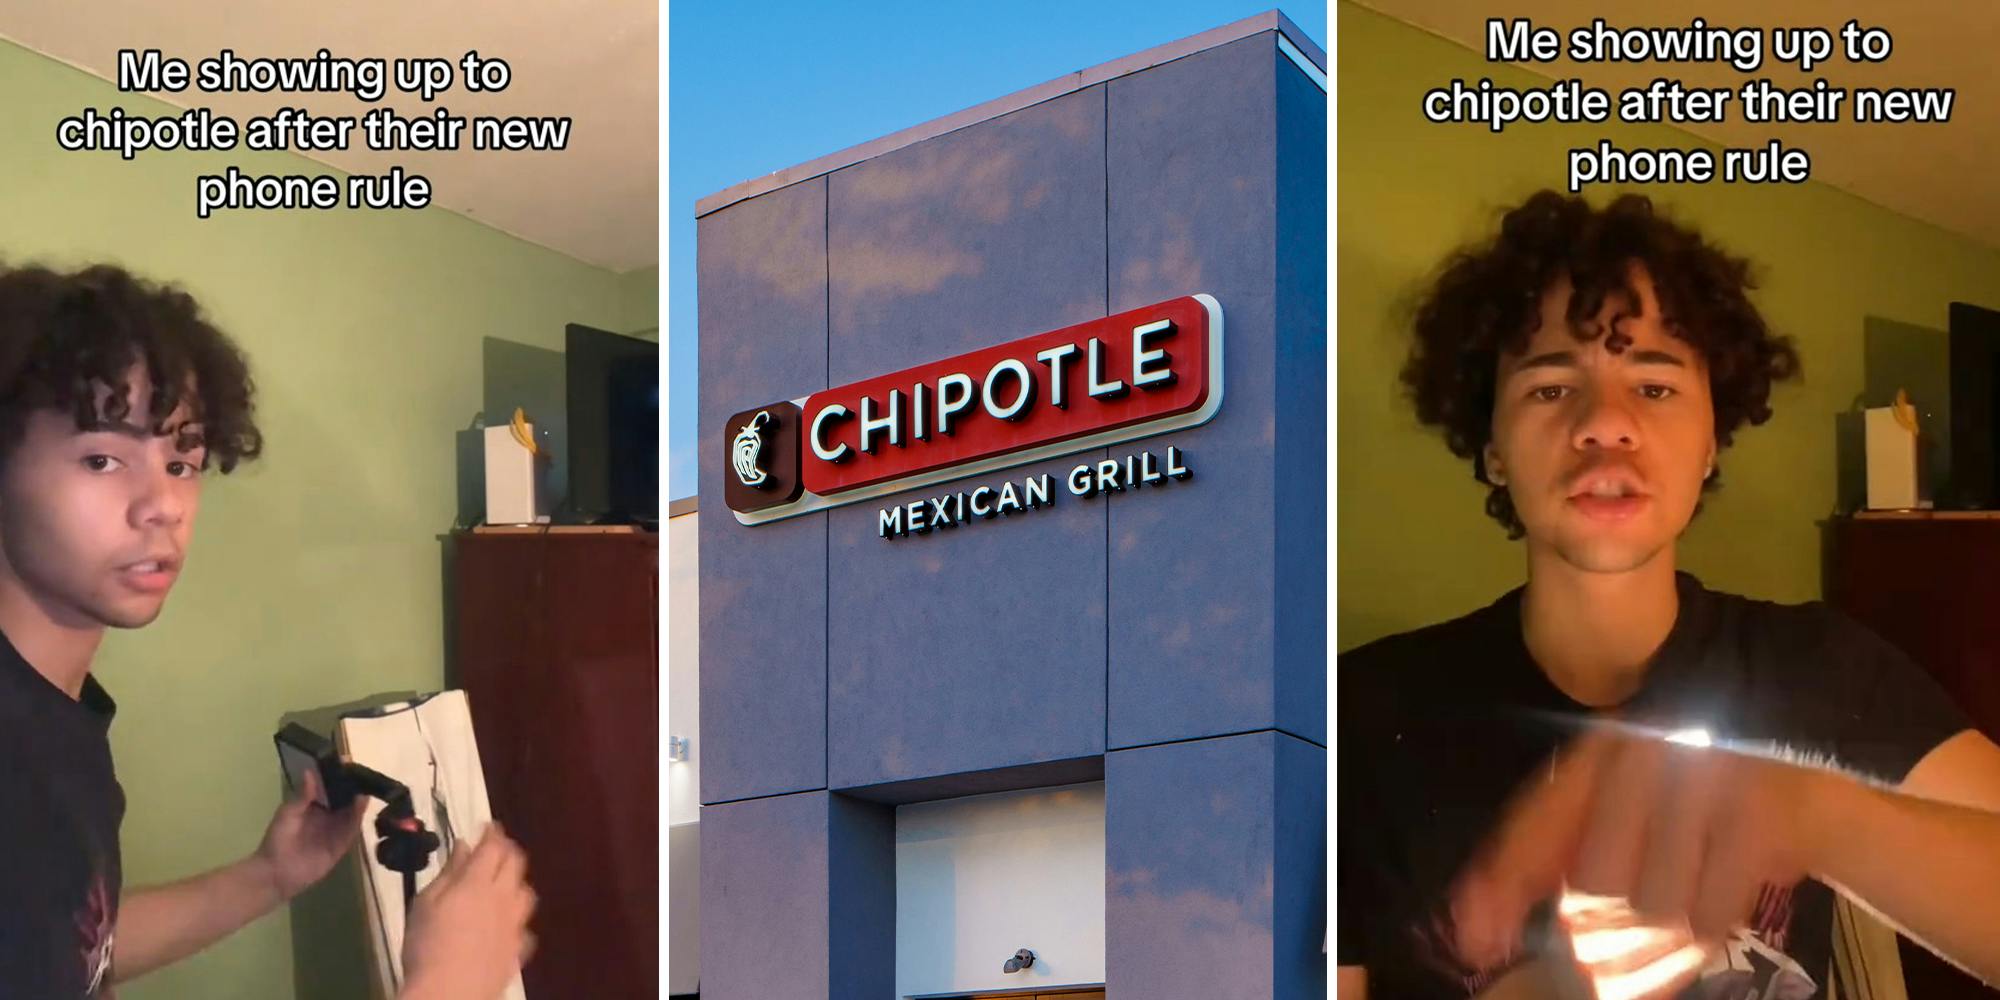 Customer considers filming Chipotle order after learning about new ‘phone rule’